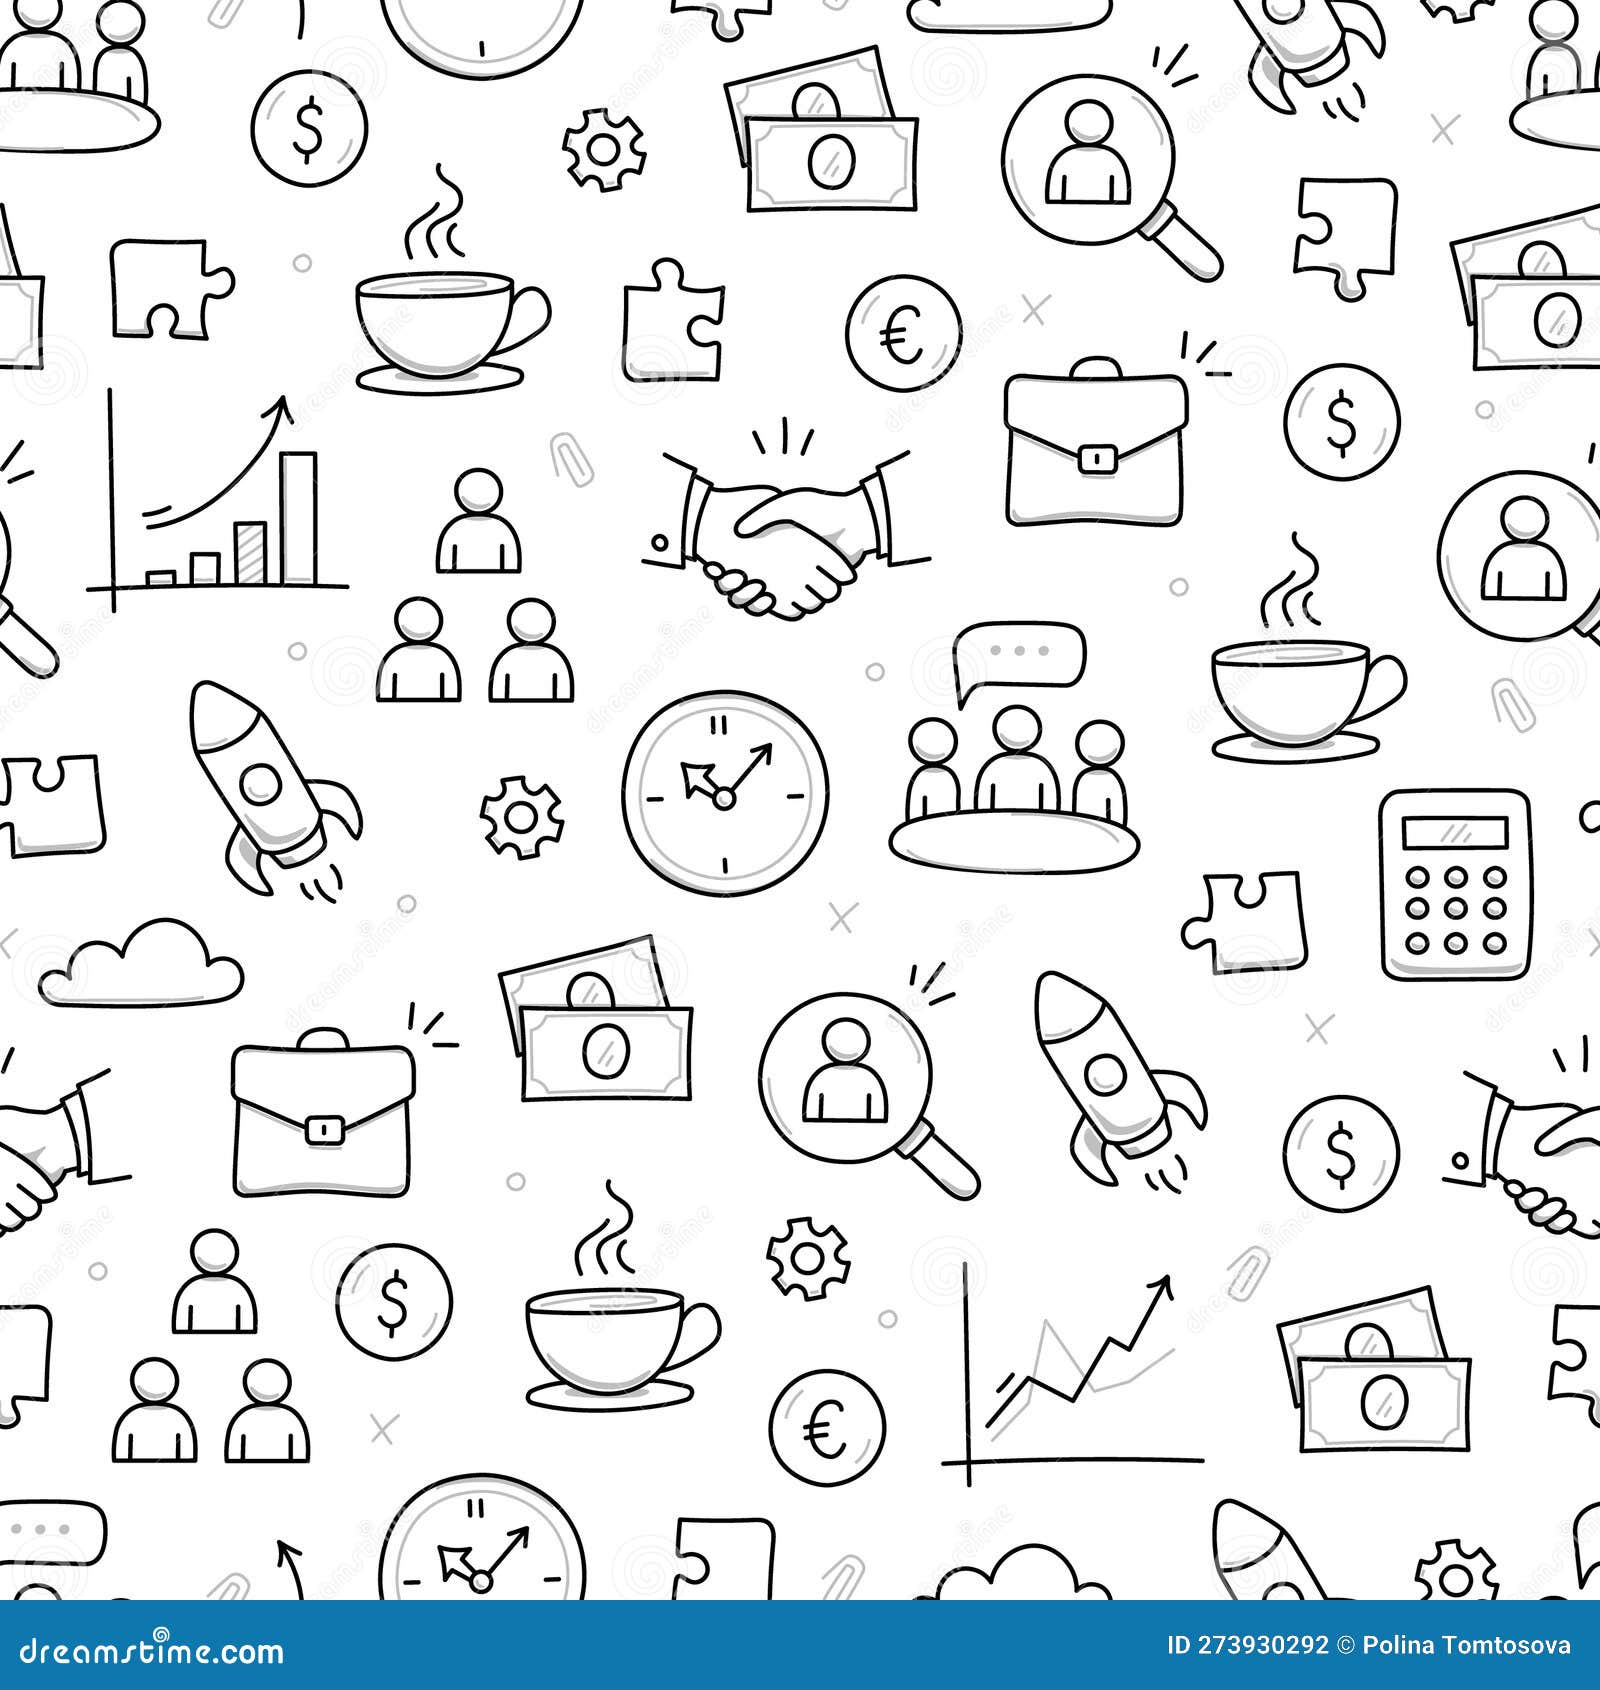 https://thumbs.dreamstime.com/z/business-job-icon-doodle-seamless-pattern-background-business-teamwork-office-career-concept-doodle-line-sketch-style-pattern-273930292.jpg